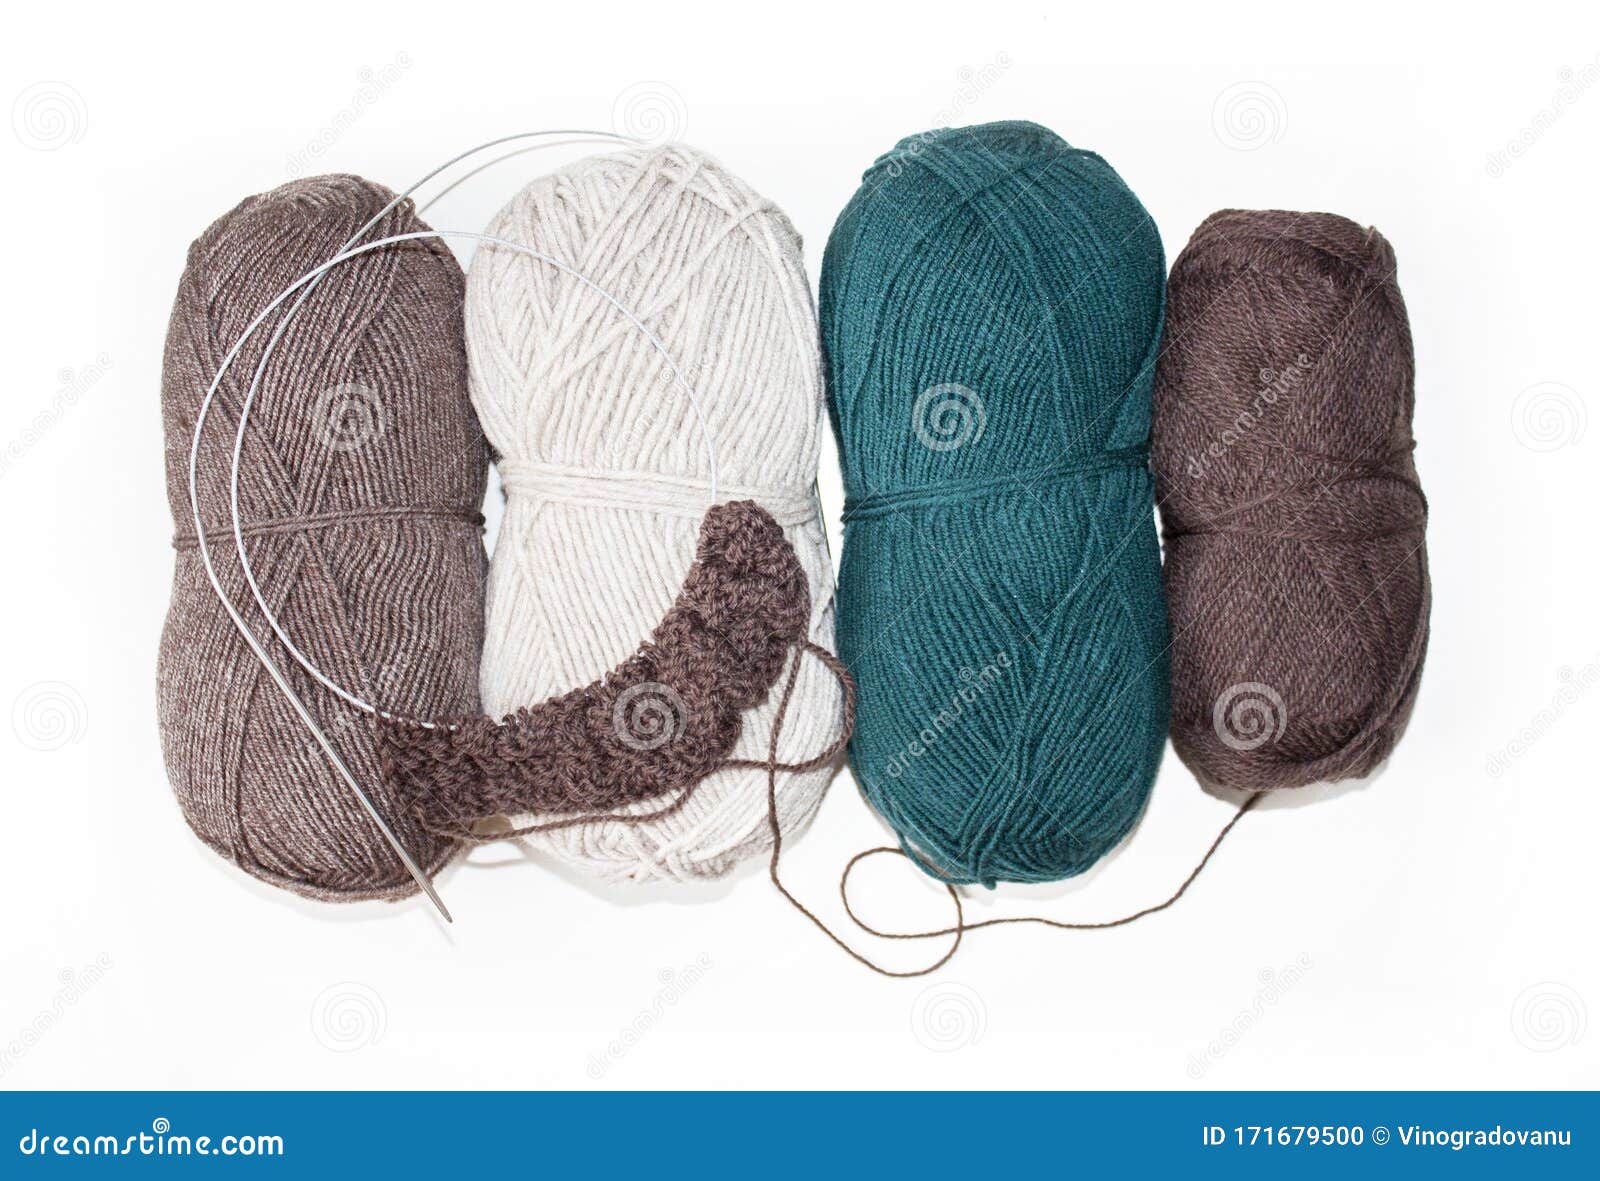 Knitting. Woolen Yarn of Green, Coffee, Dairy in Brown Color with Round  Knitting Needles for Knitting Stock Photo - Image of knit, ball: 171679500